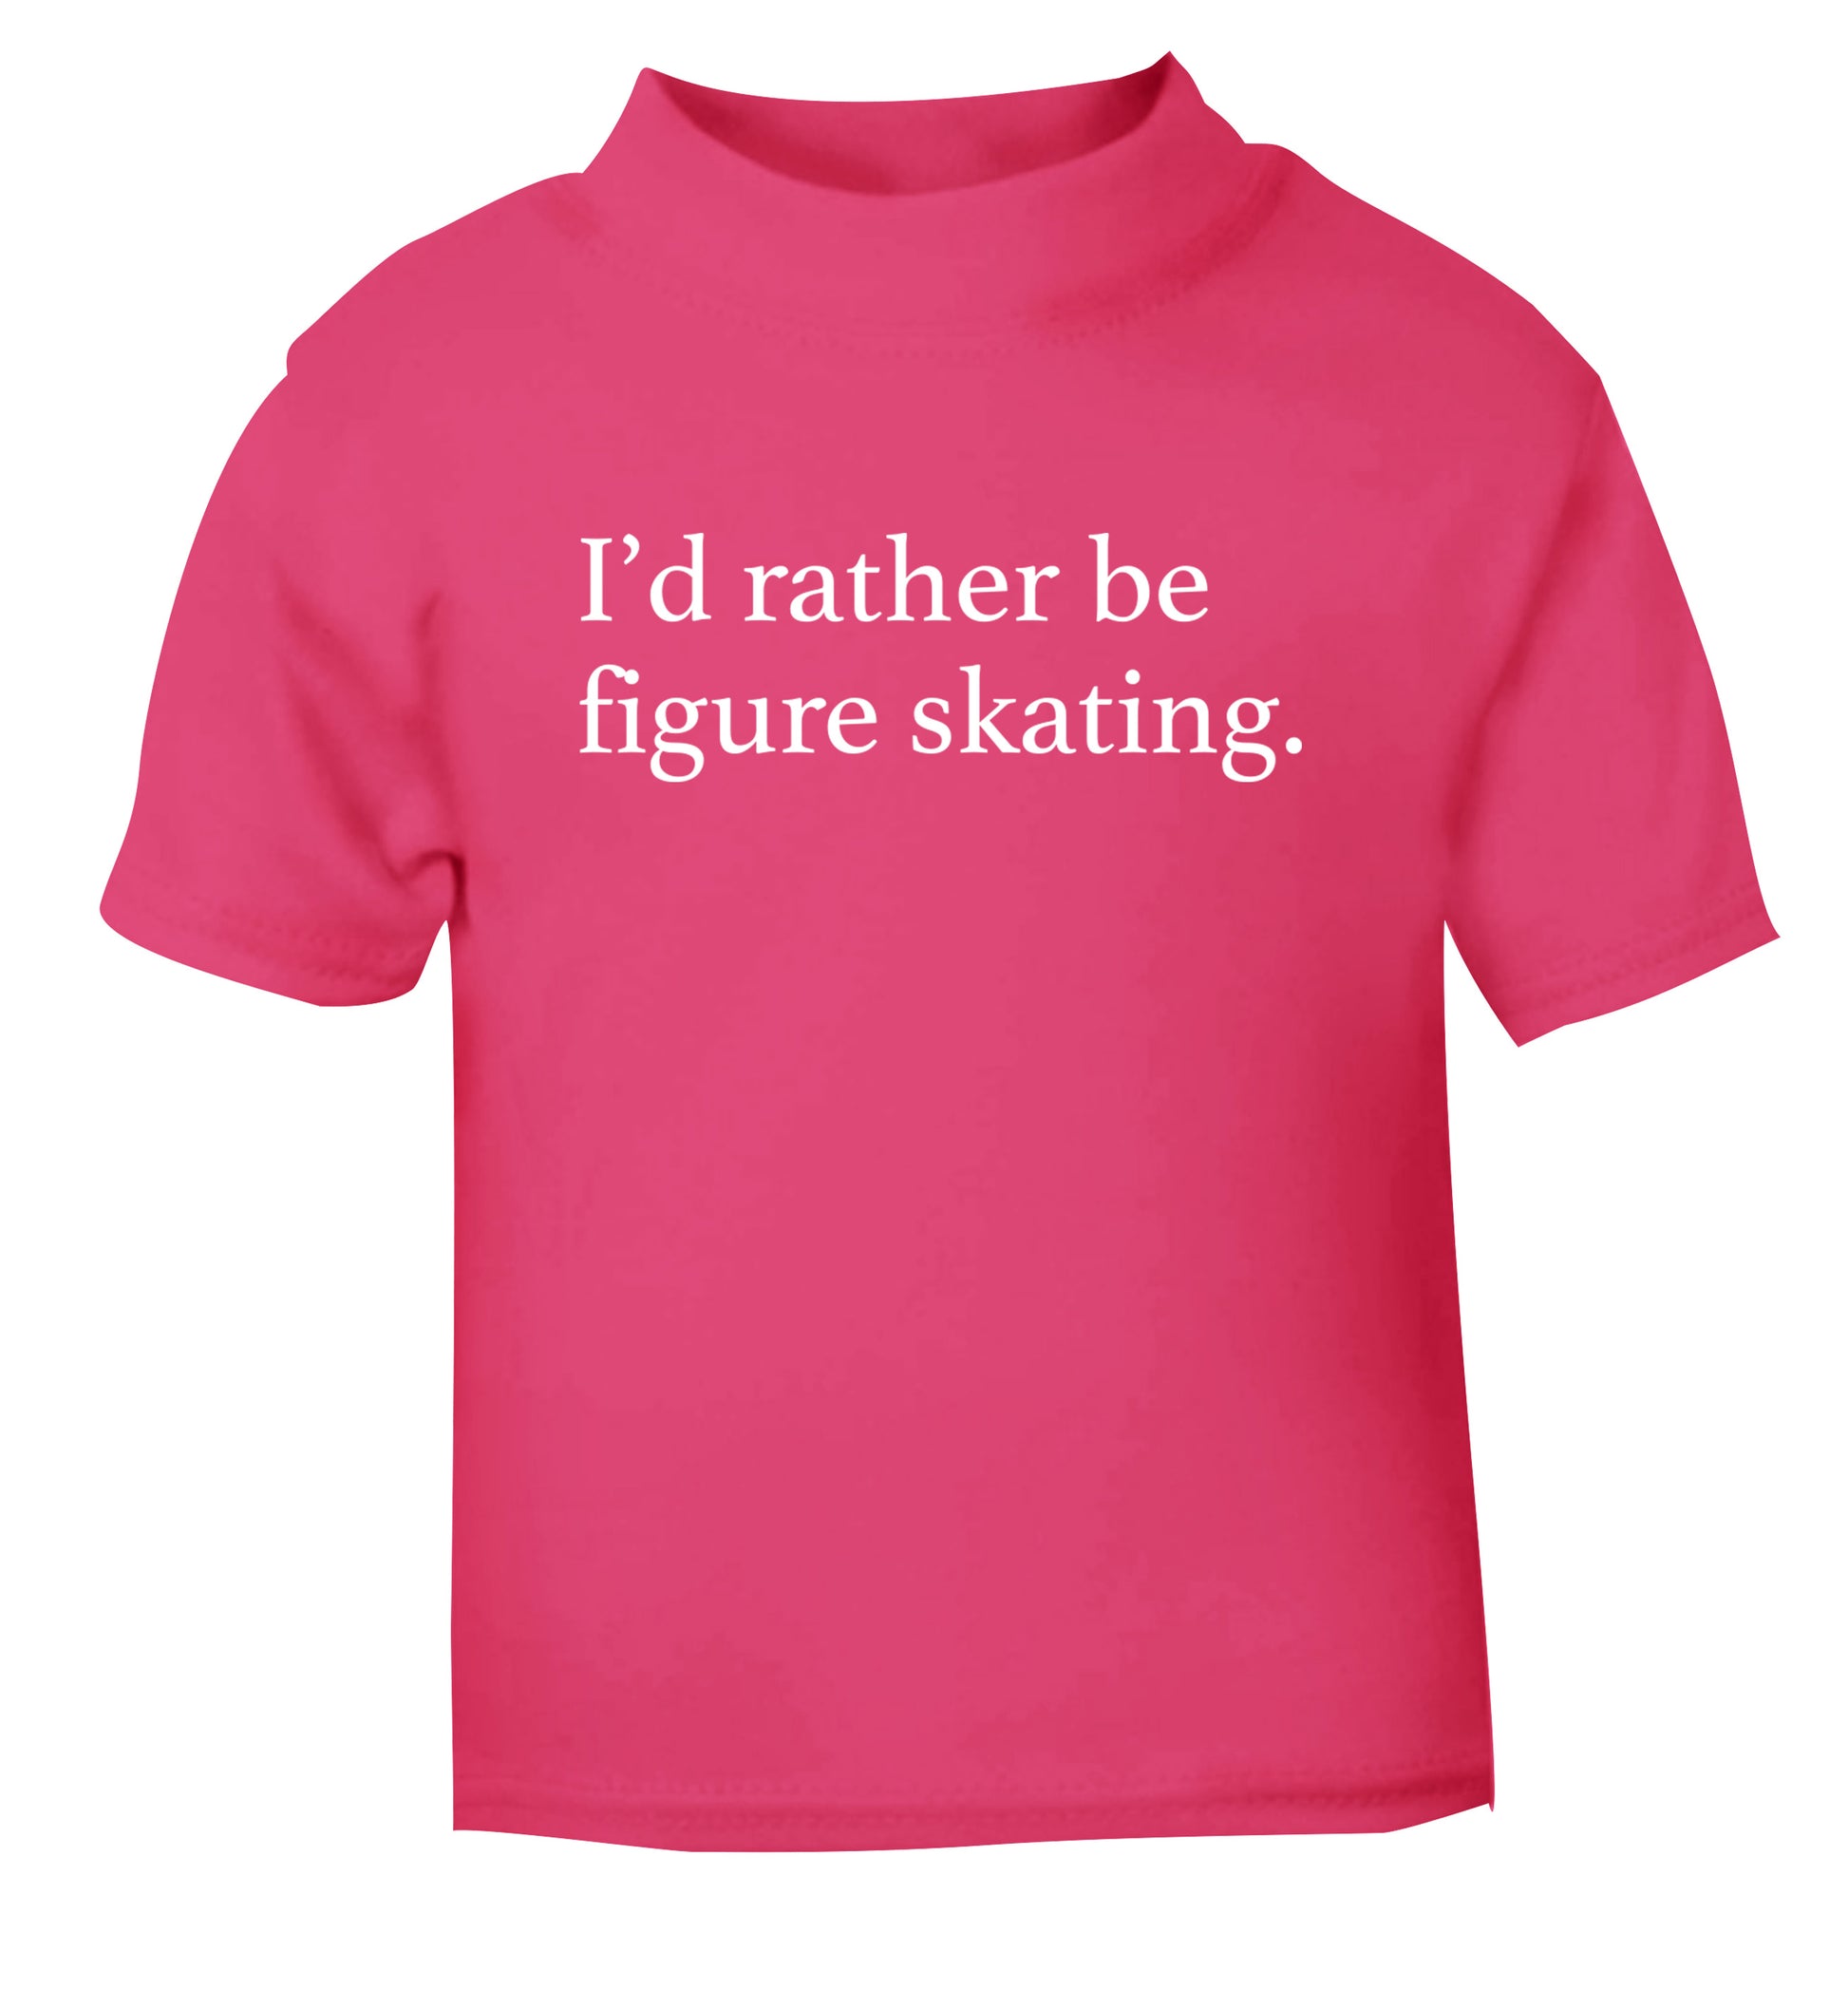 I'd rather be figure skating pink Baby Toddler Tshirt 2 Years